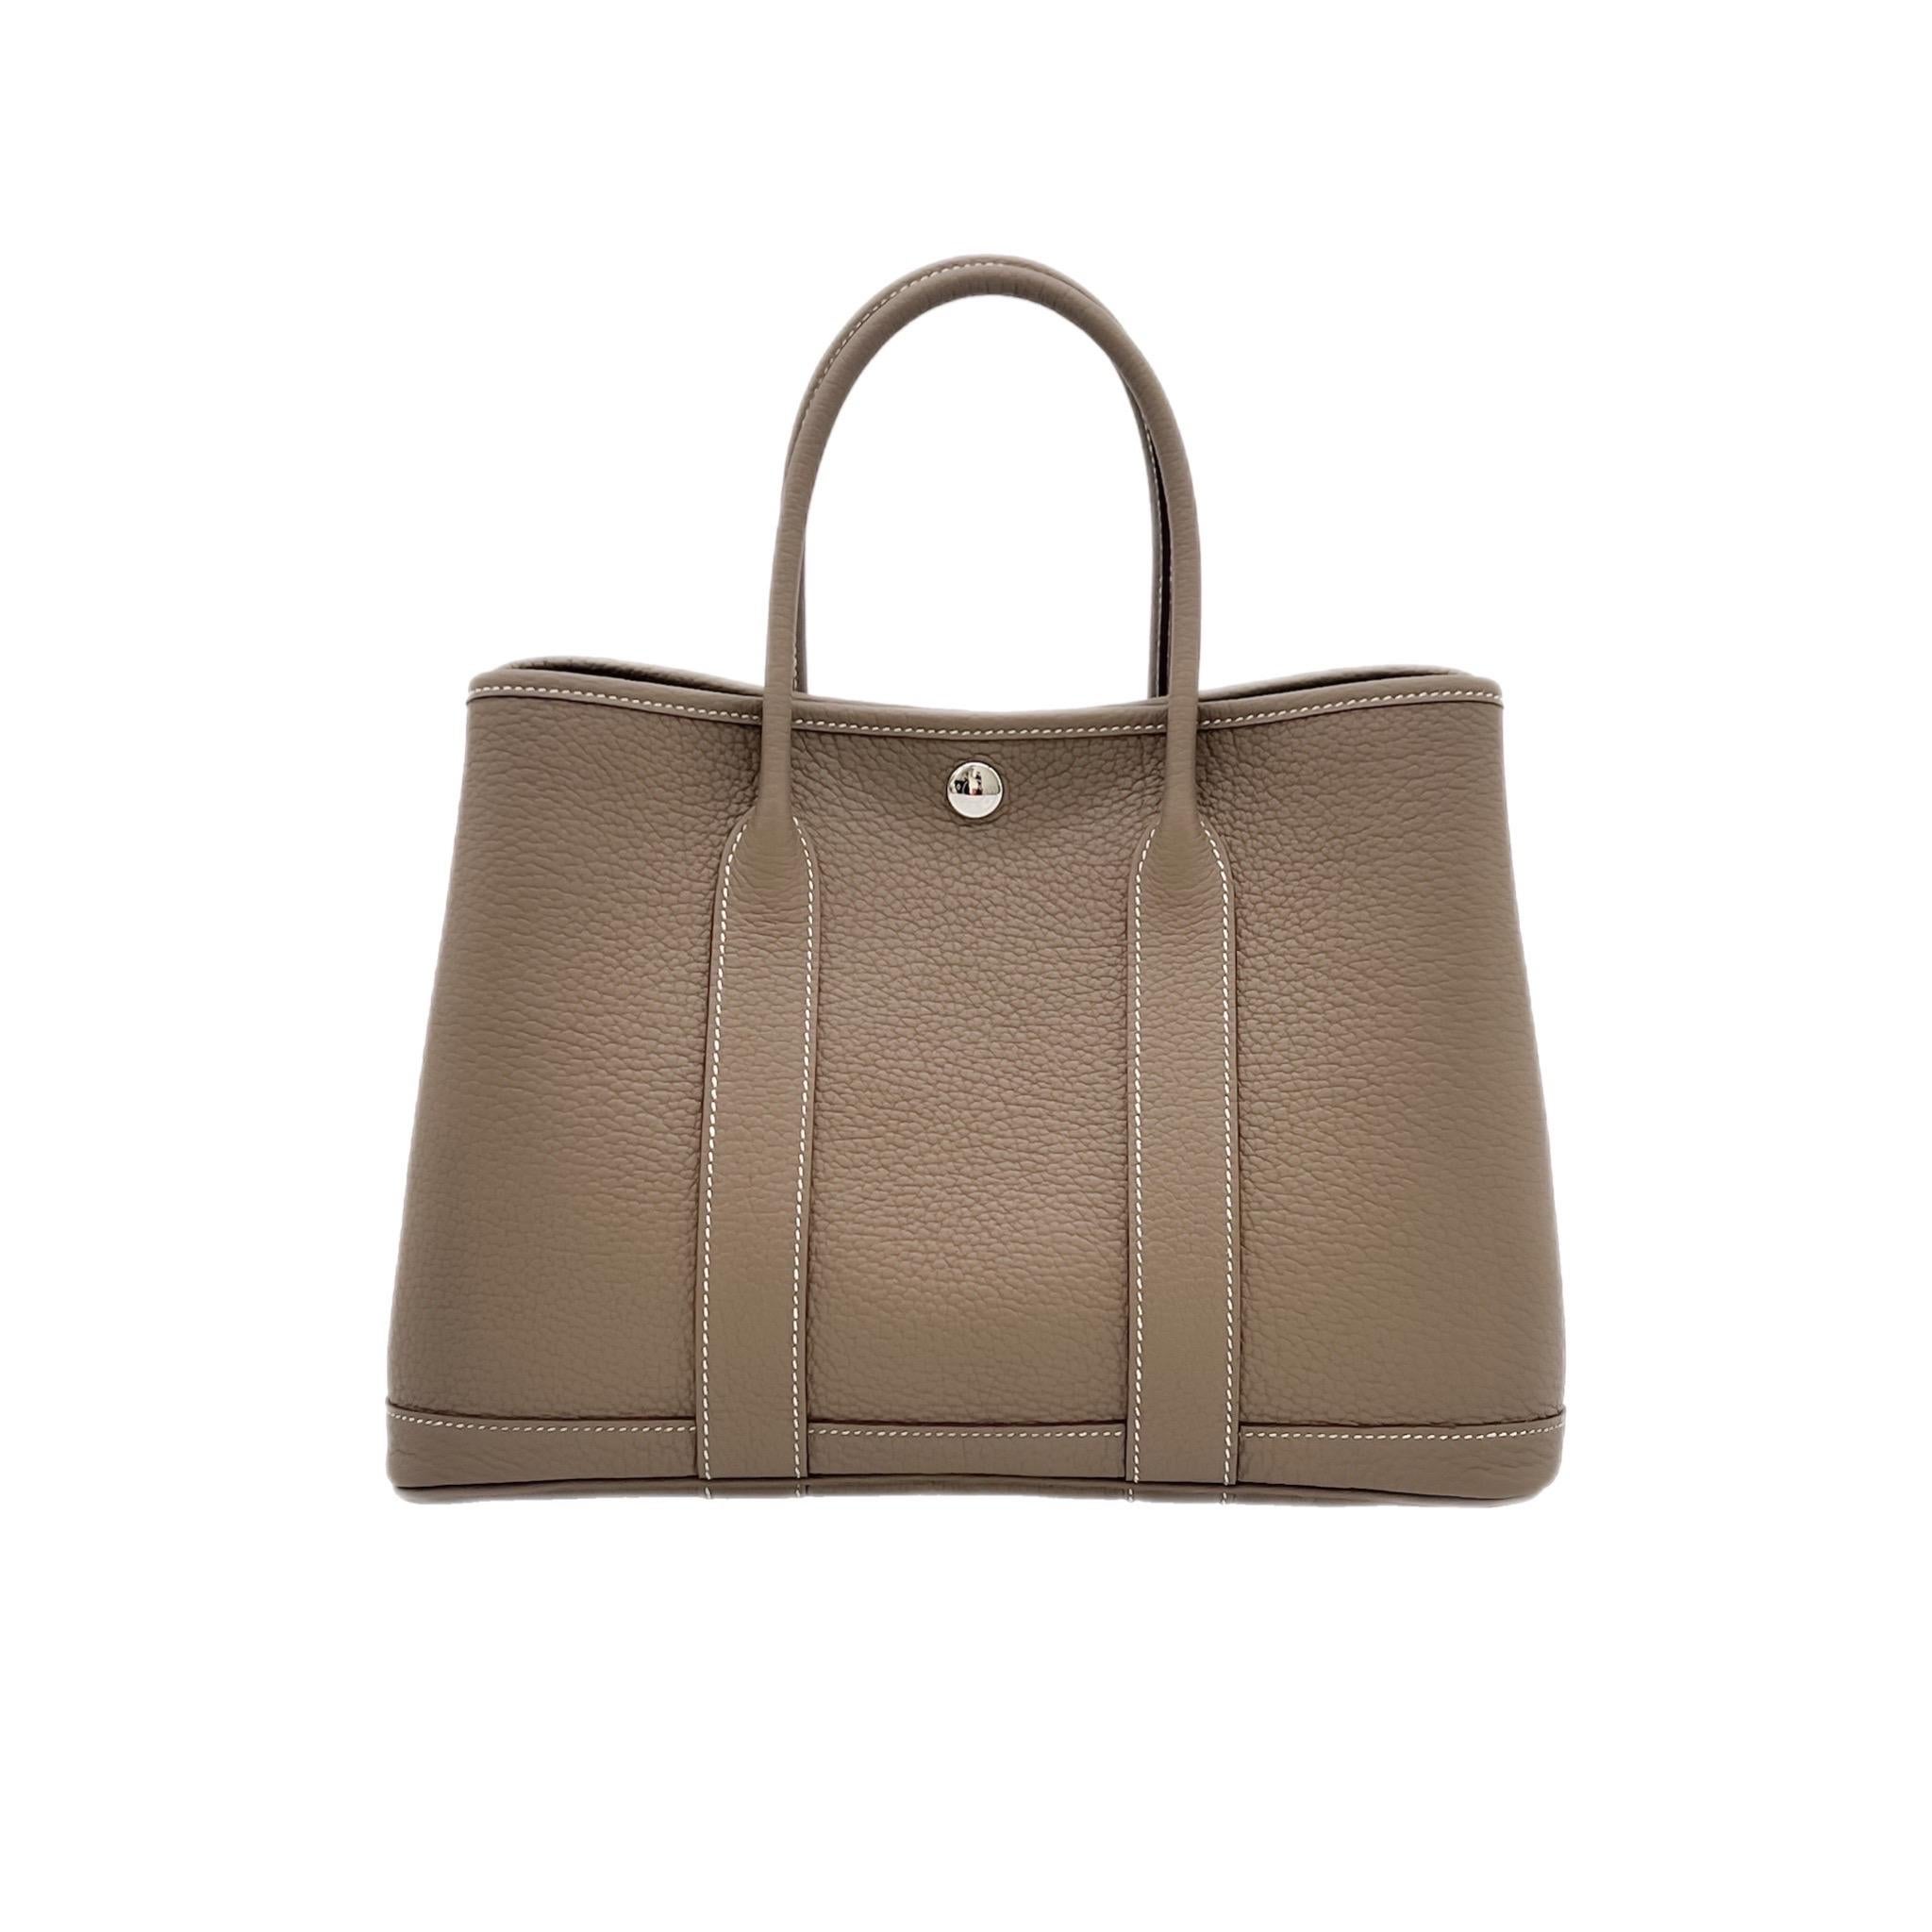 We have a elegant Hermès Garden Party 30 in Etoupe. It is in the Negonda Leather. This beautiful shade of neutral perfection, and is the perfect about town tote.

Condition: Brand new. With original box and dust bag. 